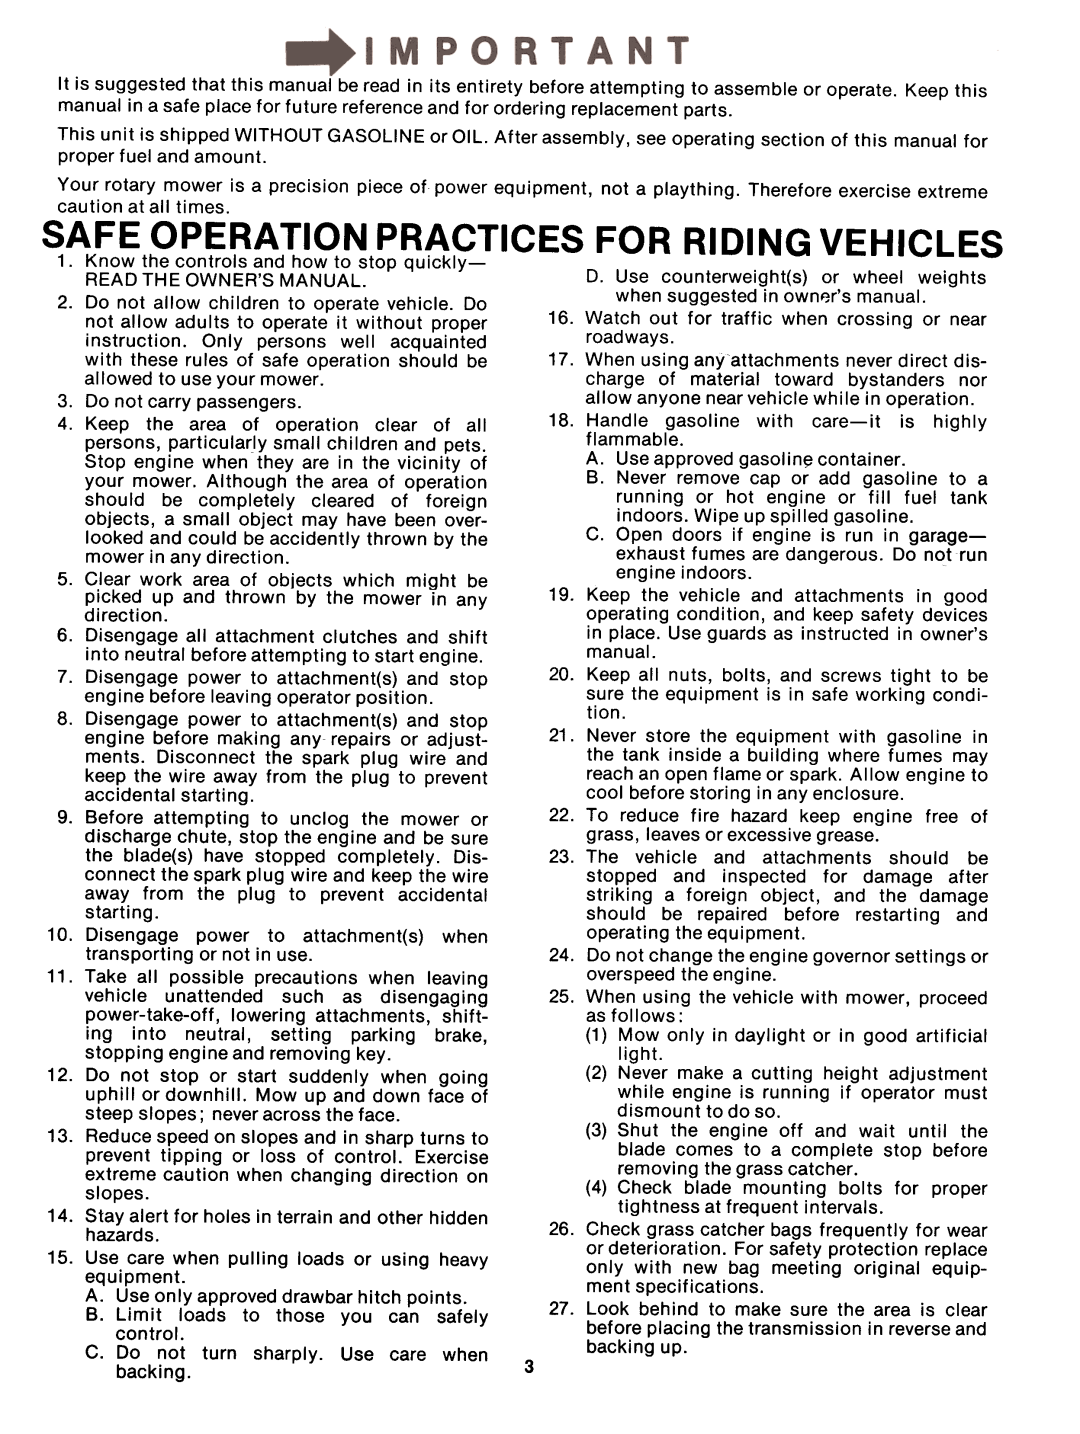 Bolens 13875-8, 13885-8 manual Safe Operation Practices For Riding Vehicles 